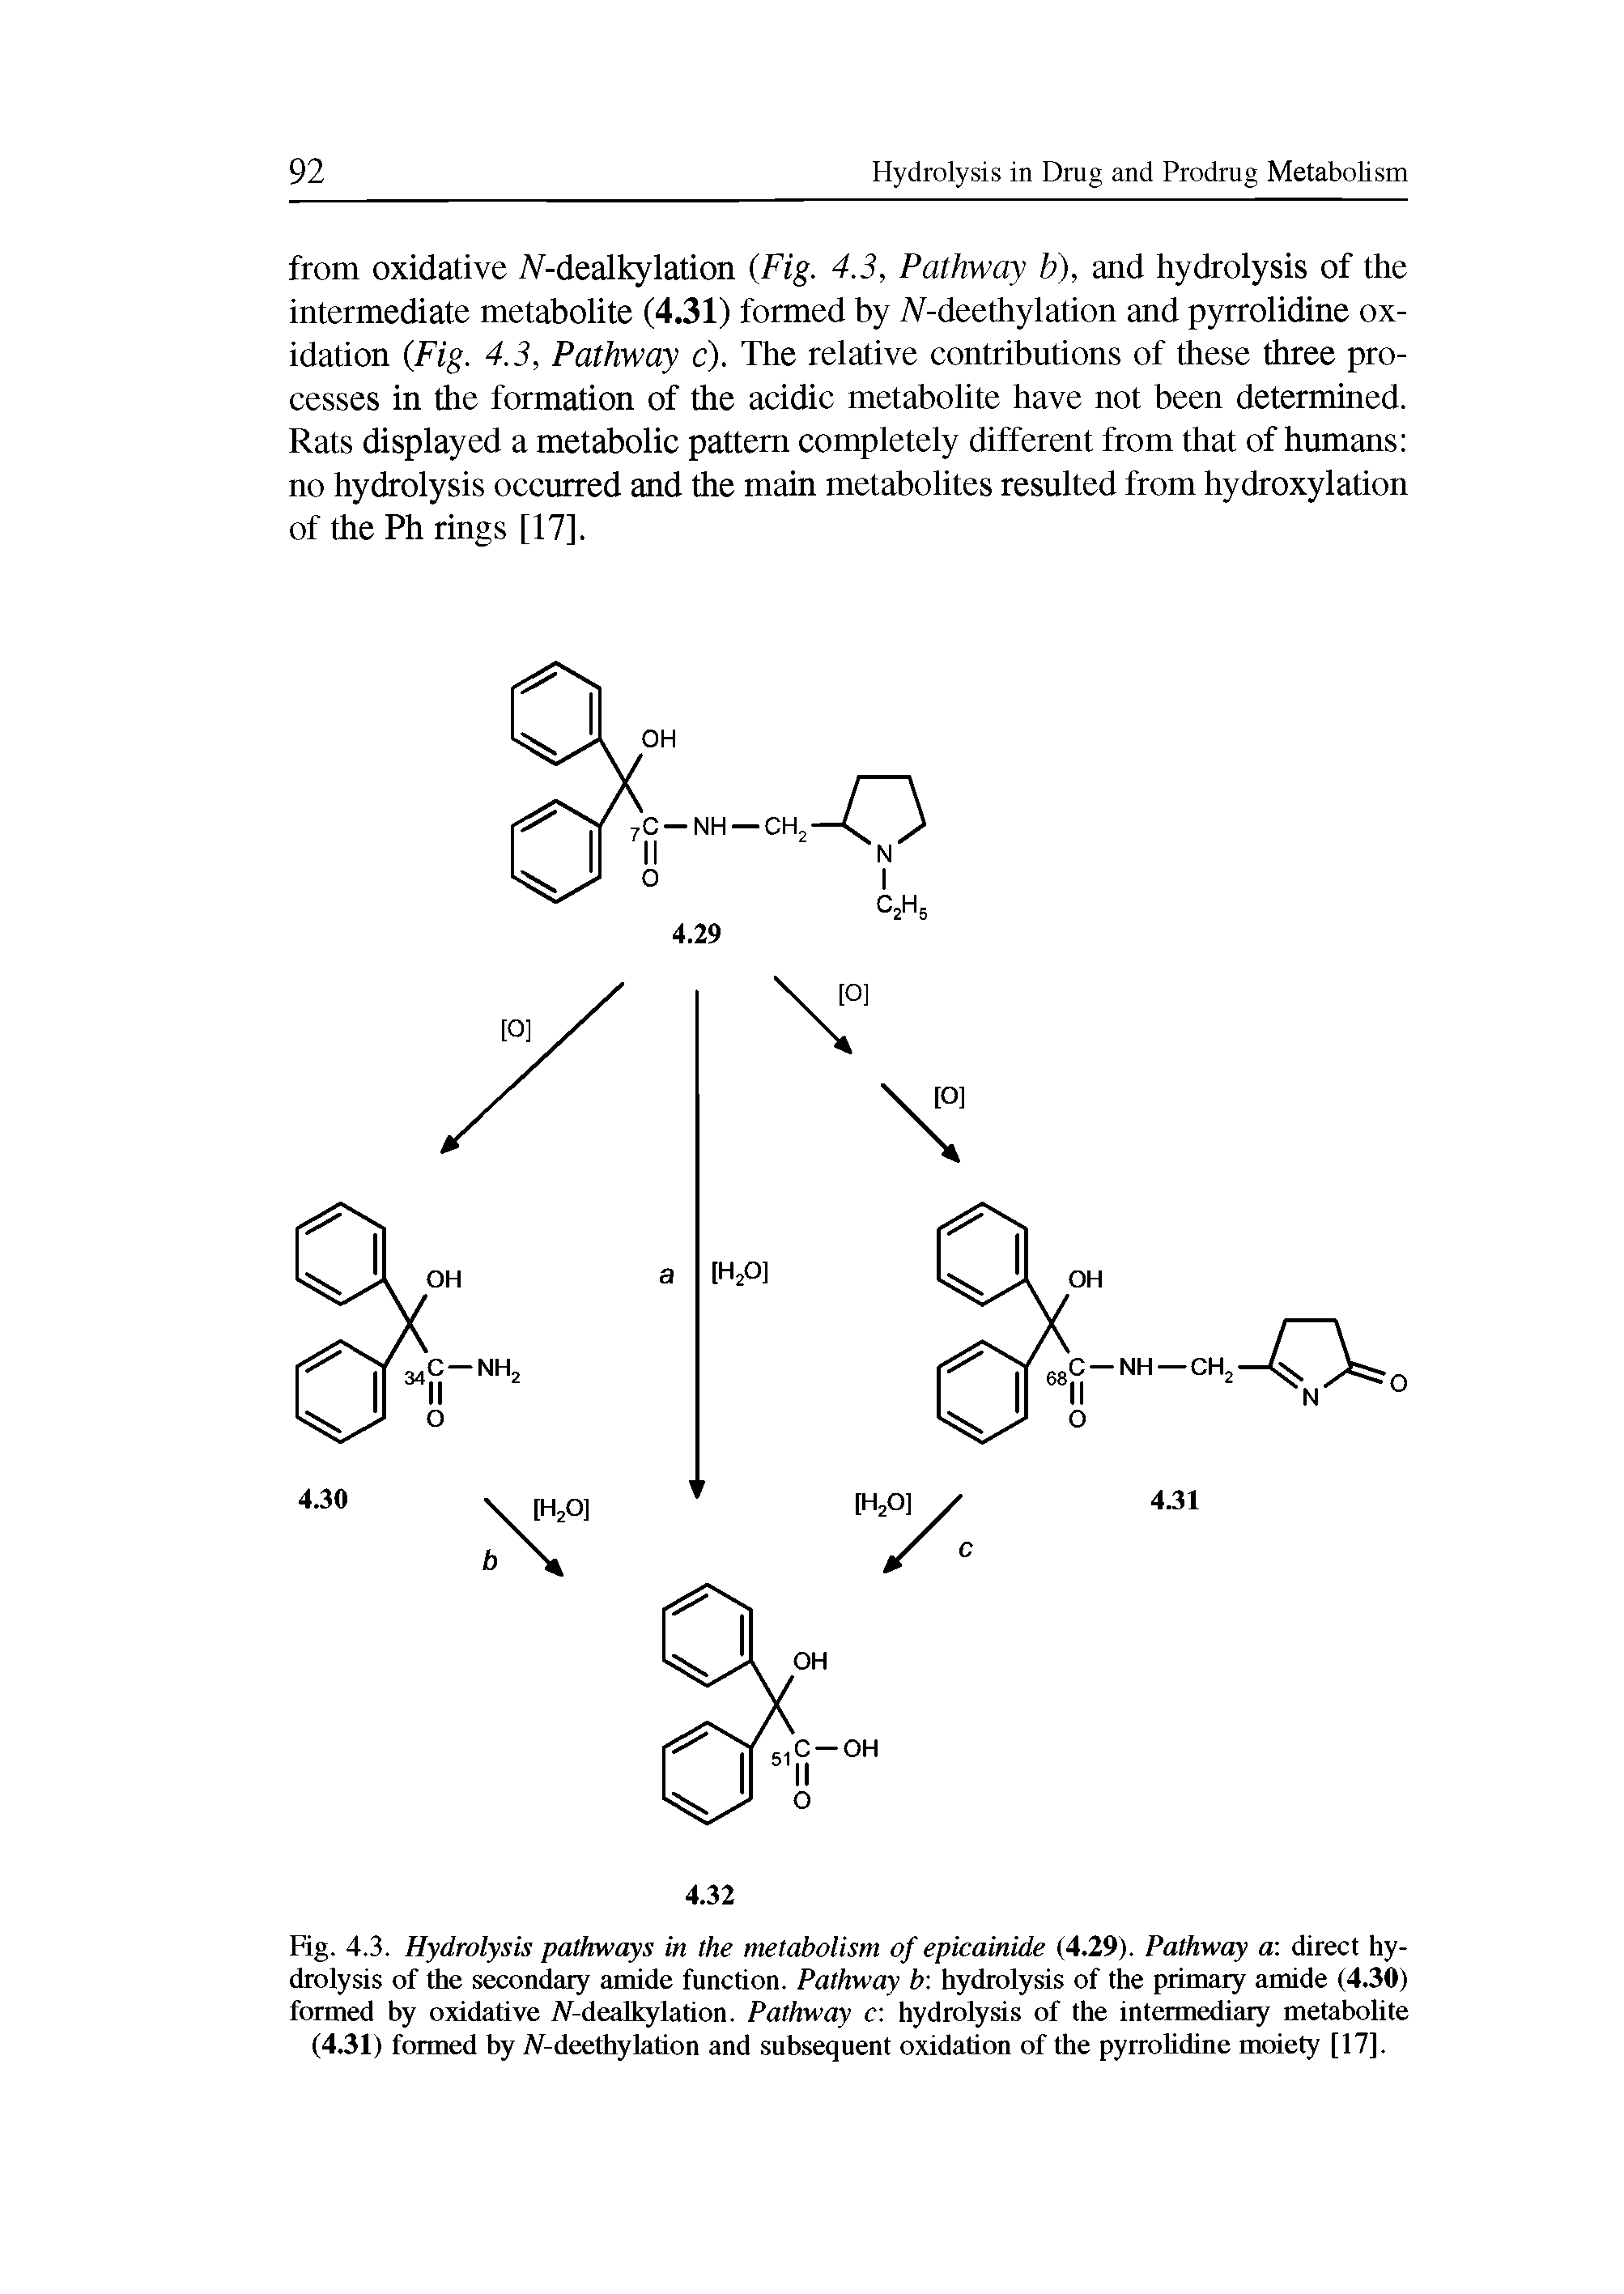 Fig. 4.3. Hydrolysis pathways in the metabolism of epicainide (4.29). Pathway a direct hydrolysis of the secondary amide function. Pathway b hydrolysis of the primary amide (4.30) formed by oxidative (V-dealkylation. Pathway c hydrolysis of the intermediary metabolite (4.31) formed by (V-deethylation and subsequent oxidation of the pyrrolidine moiety [17].